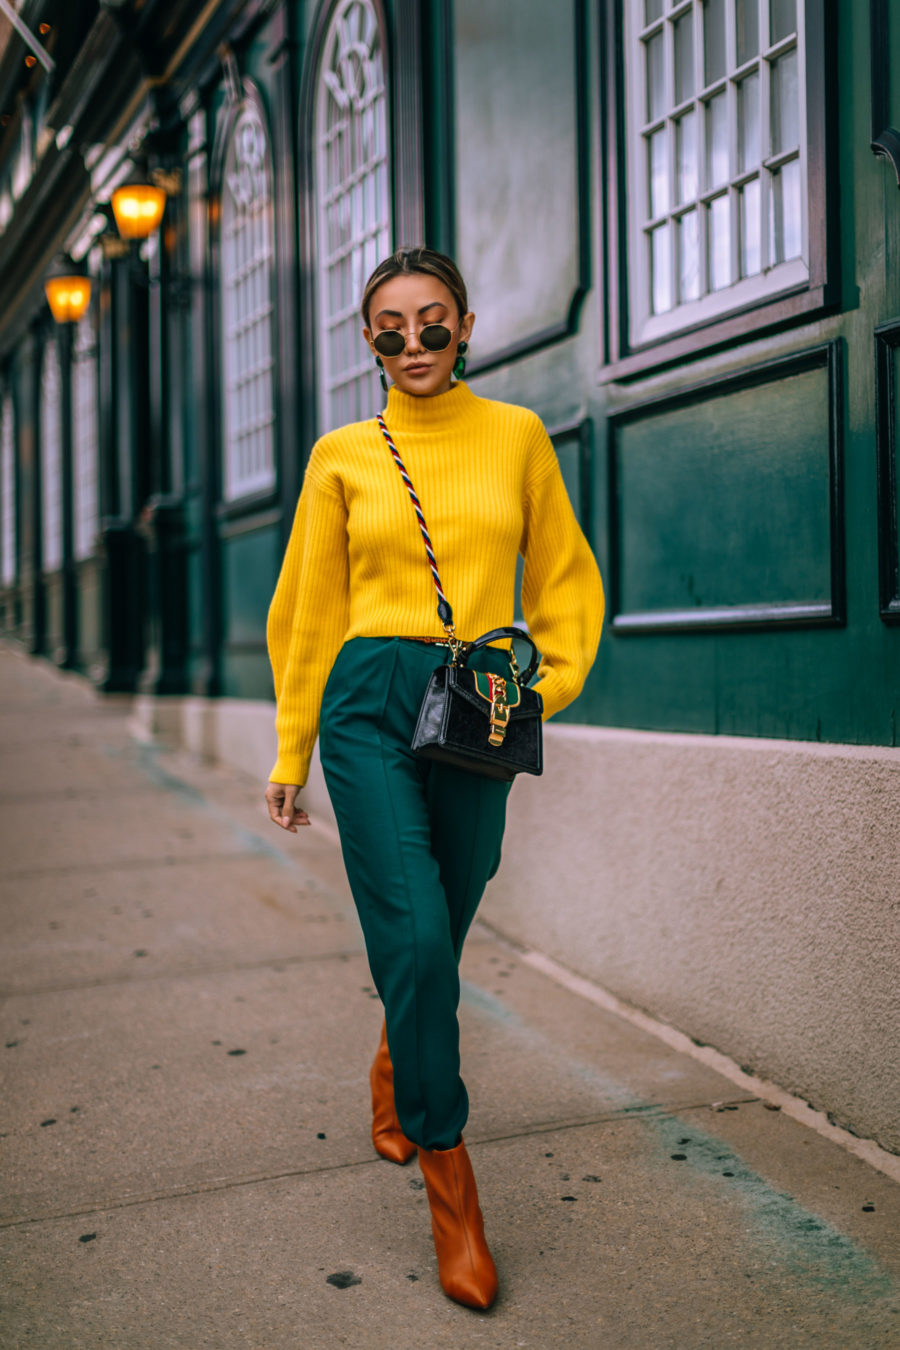 fashion blogger jessica wang shares favorite winter fashion brands wearing Yellow tibi sweater with boss green trousers and gucci Bag // Notjessfashion.com